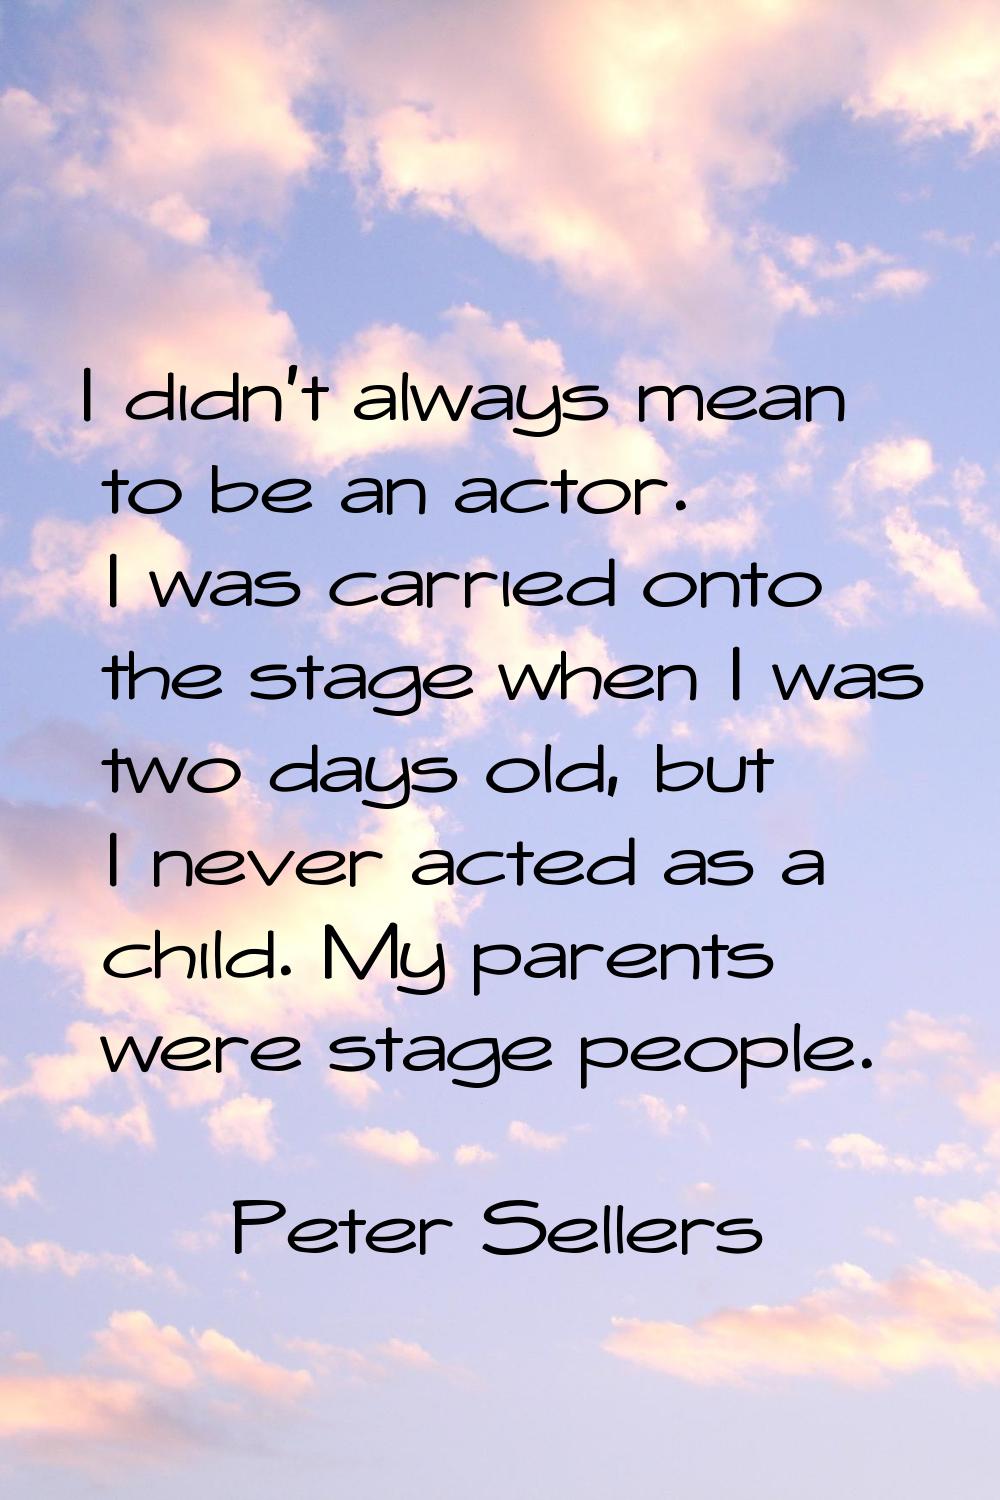 I didn't always mean to be an actor. I was carried onto the stage when I was two days old, but I ne